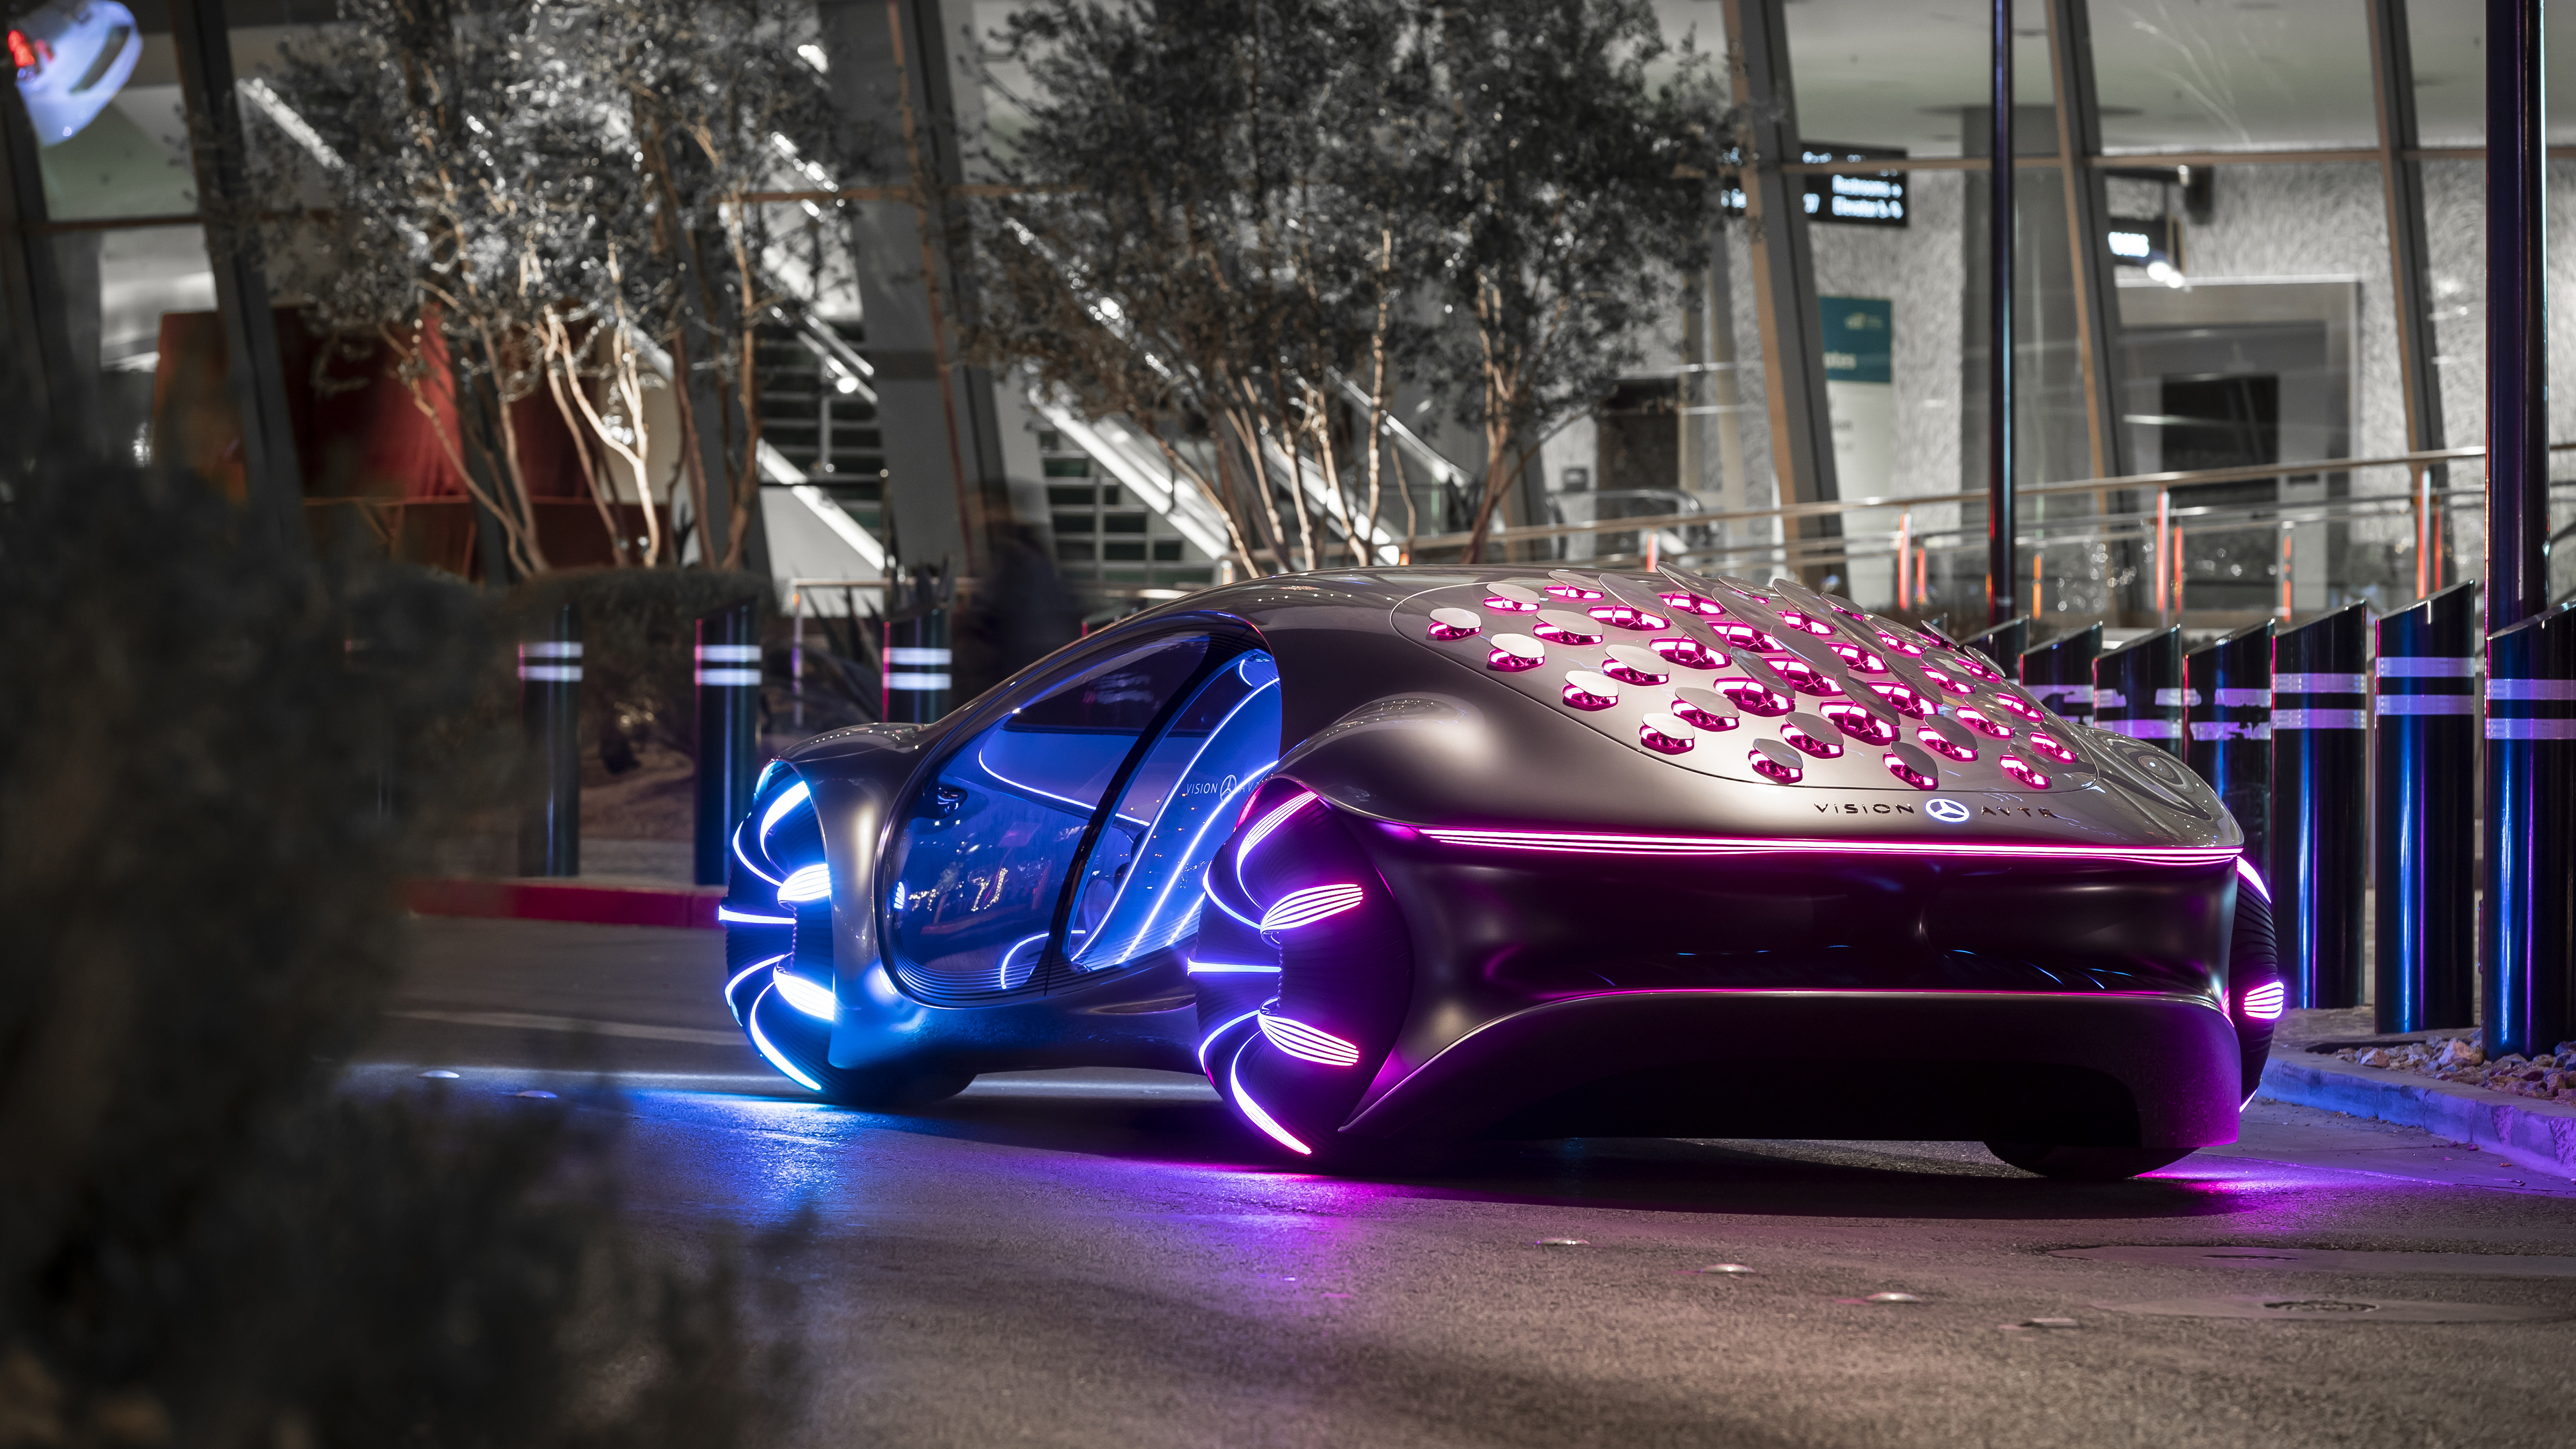 MercedesBenz  Inspired by Avatar we created the VISION AVTR a vehicle  driven by intuition With its bionic design it resembles a living organism  which is in harmony with nature Avatar mb4meAVTRxGW 